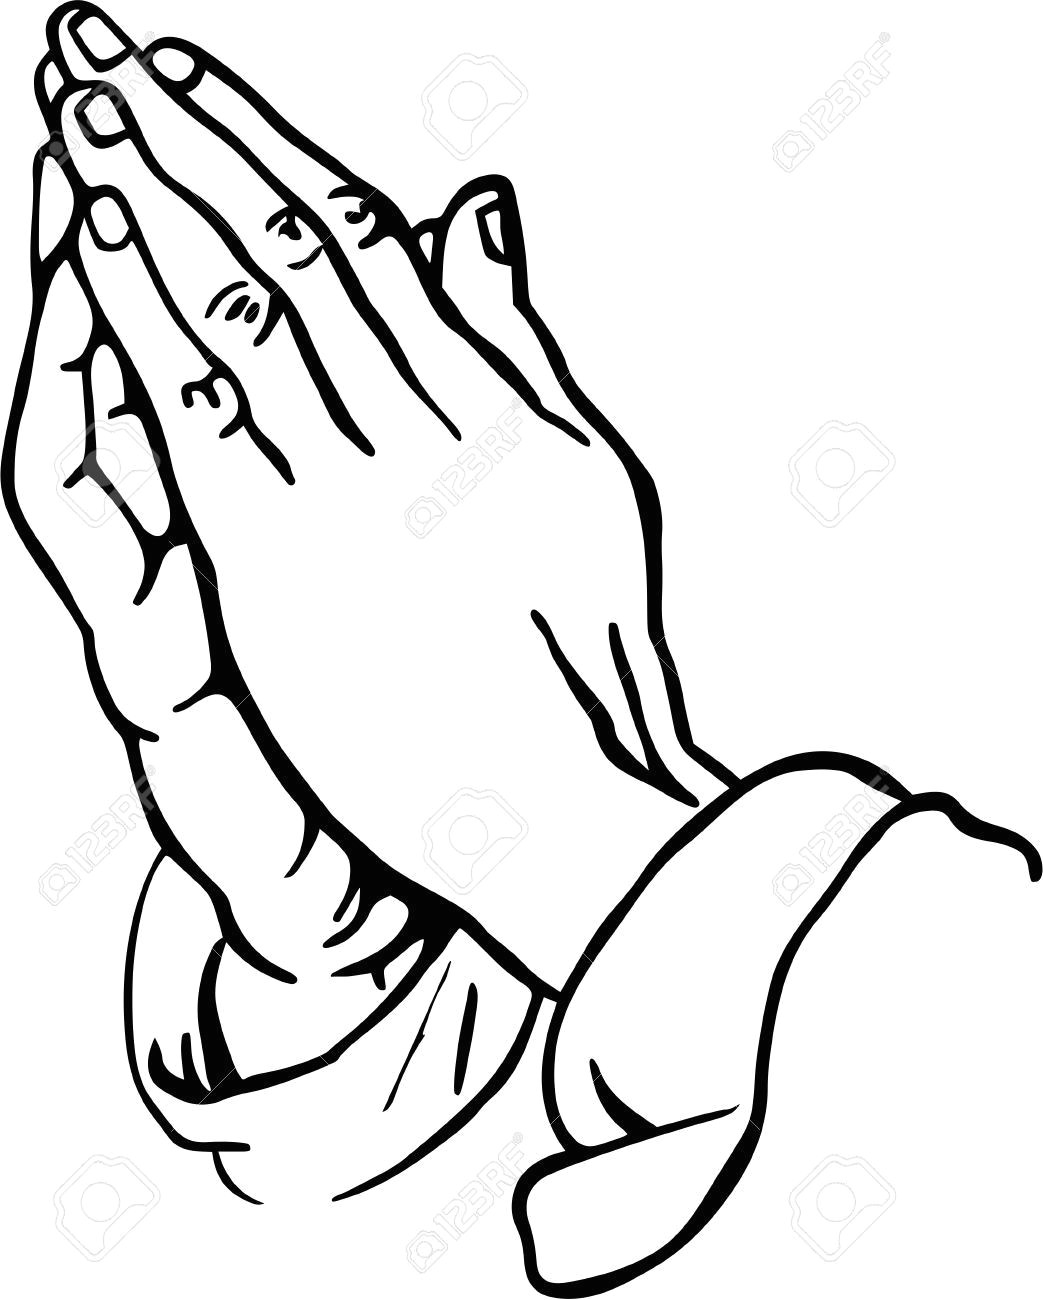 Drawing Of Hands Clasped Praying Hands Clipart Stock Photo Picture and Royalty Free Image